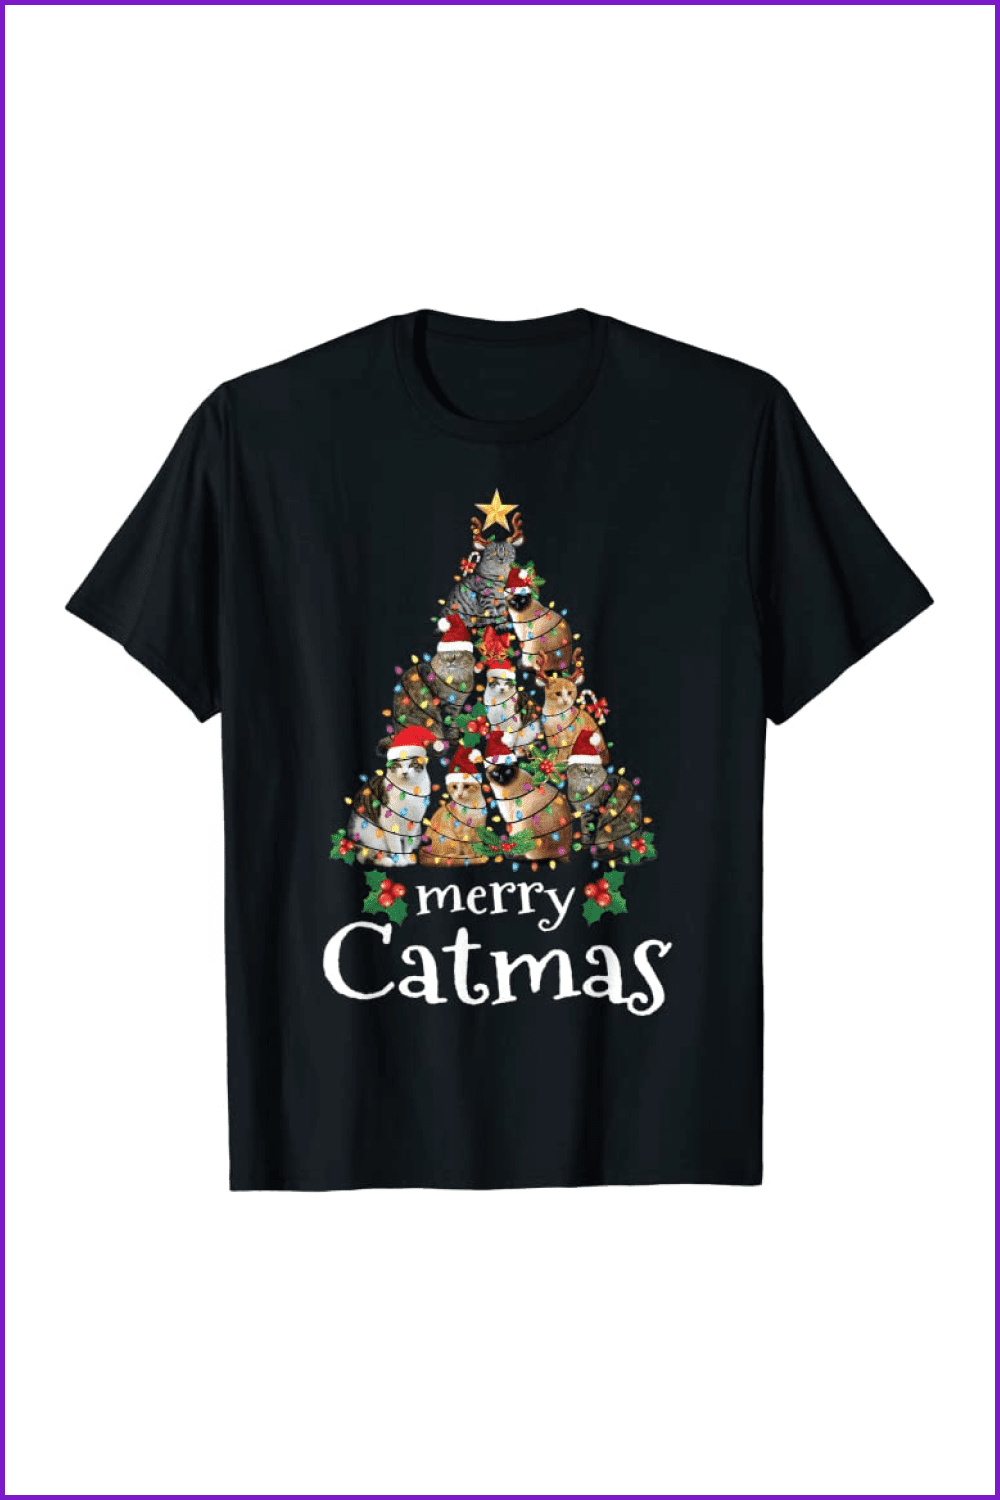 Black t-shirt with The nine cats form a Christmas tree.